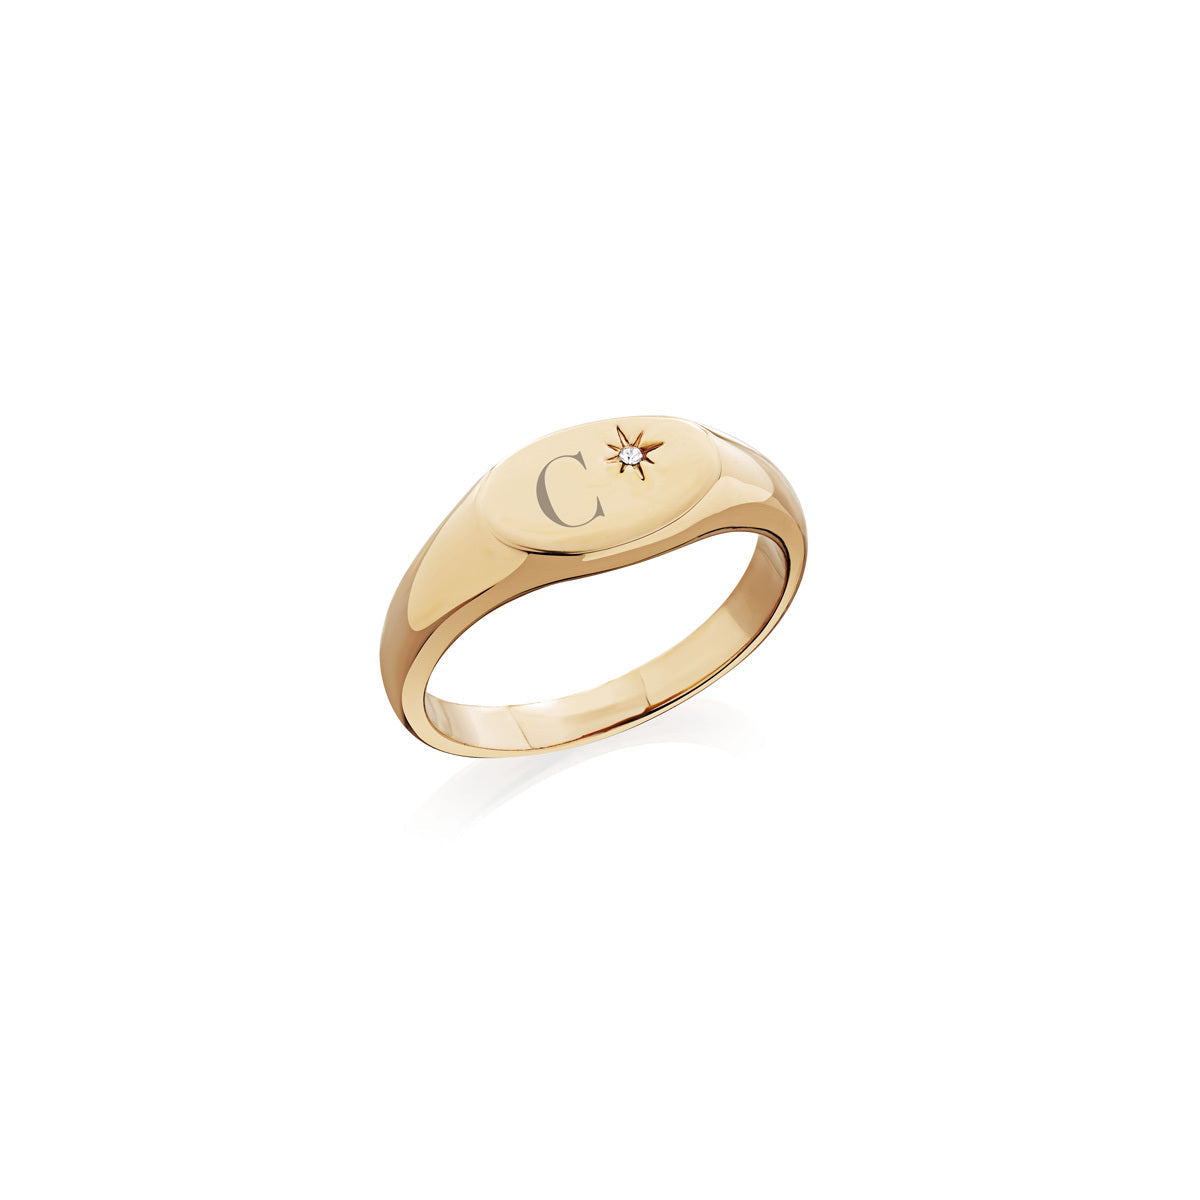 Stamped Crescent Moon Ring 7 / Gold Filled / Oval